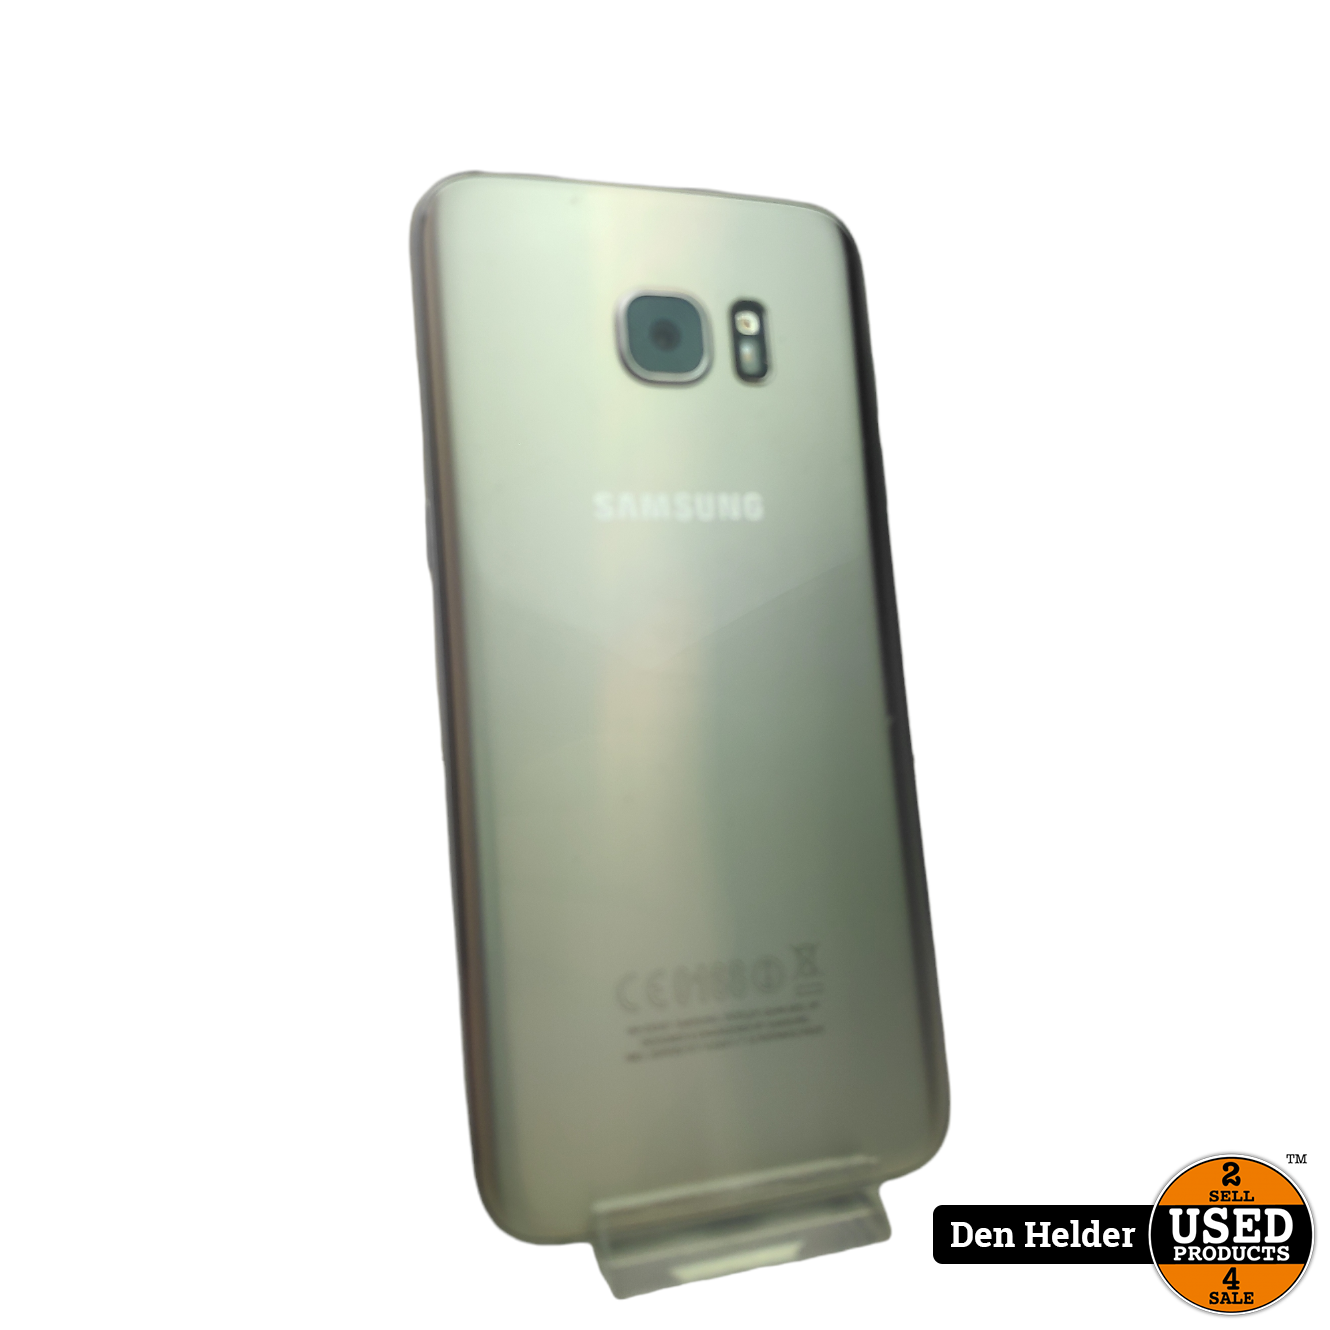 Samsung Galaxy S7 Edge Android - In Staat - Used Products Den Helder